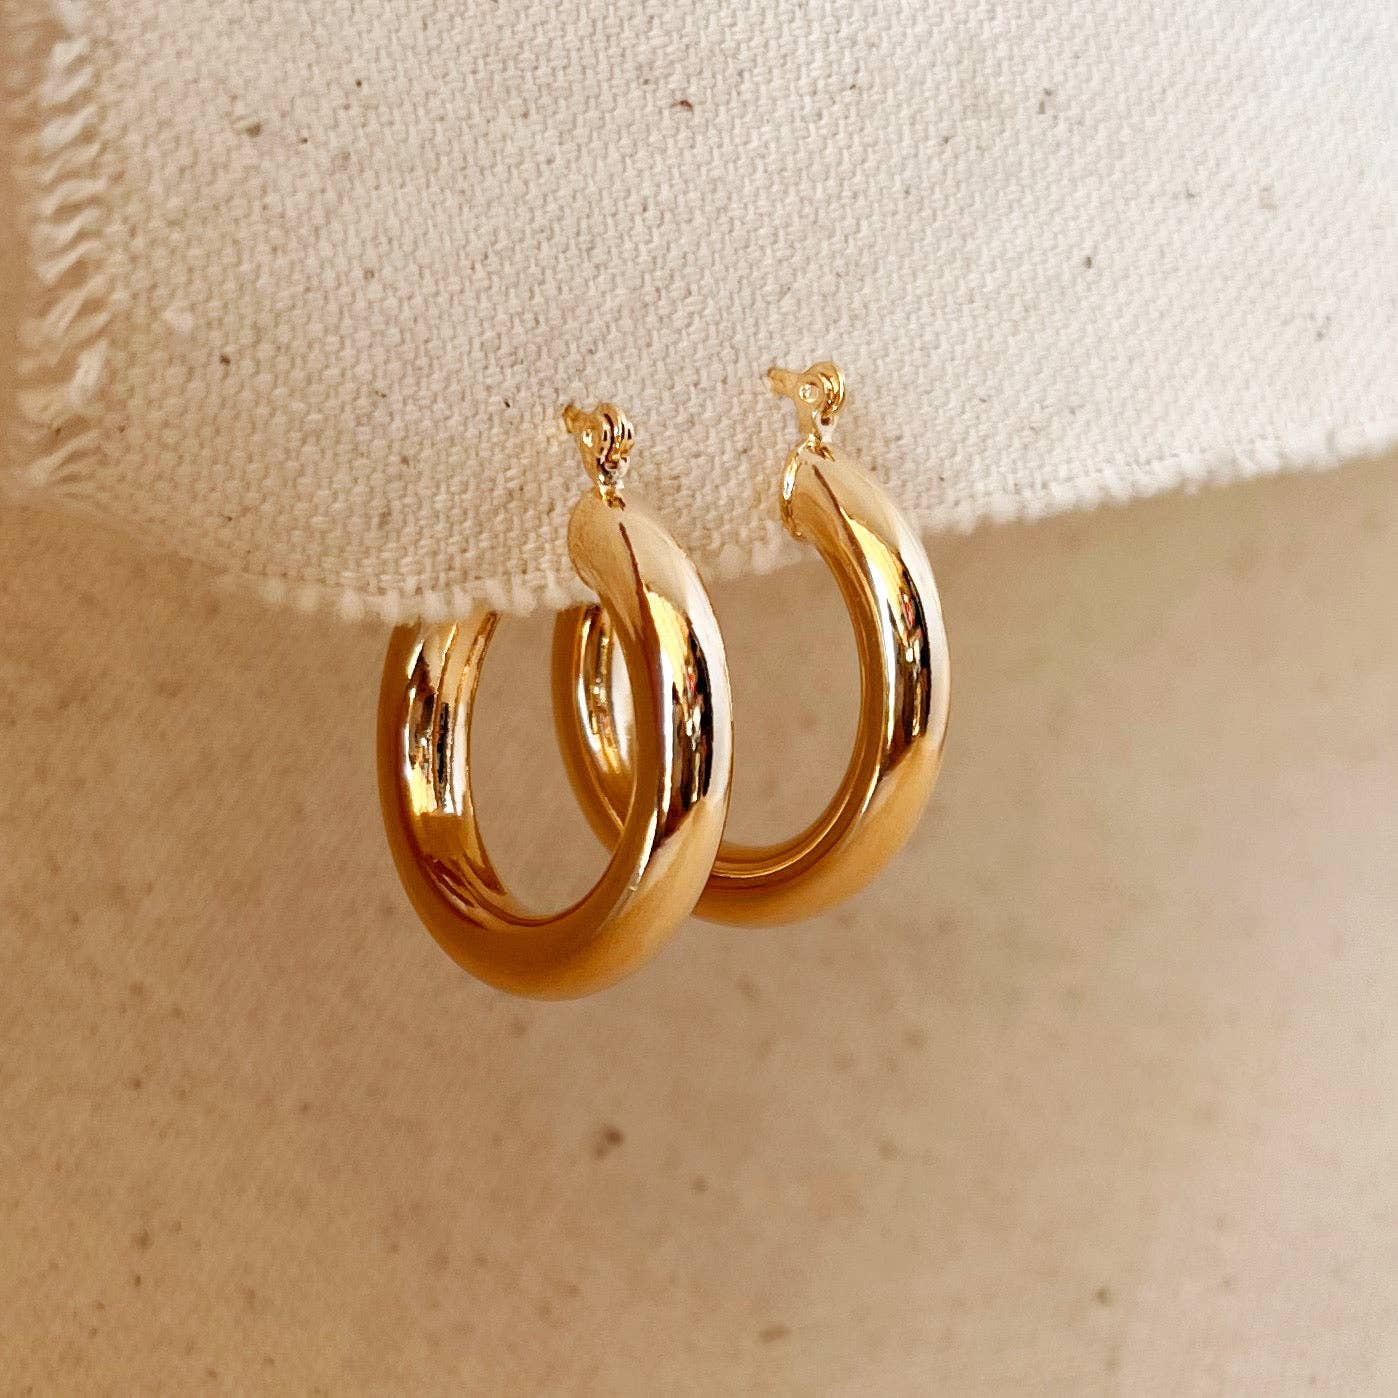 18k Gold Filled Classic 25mm Tube Hoops